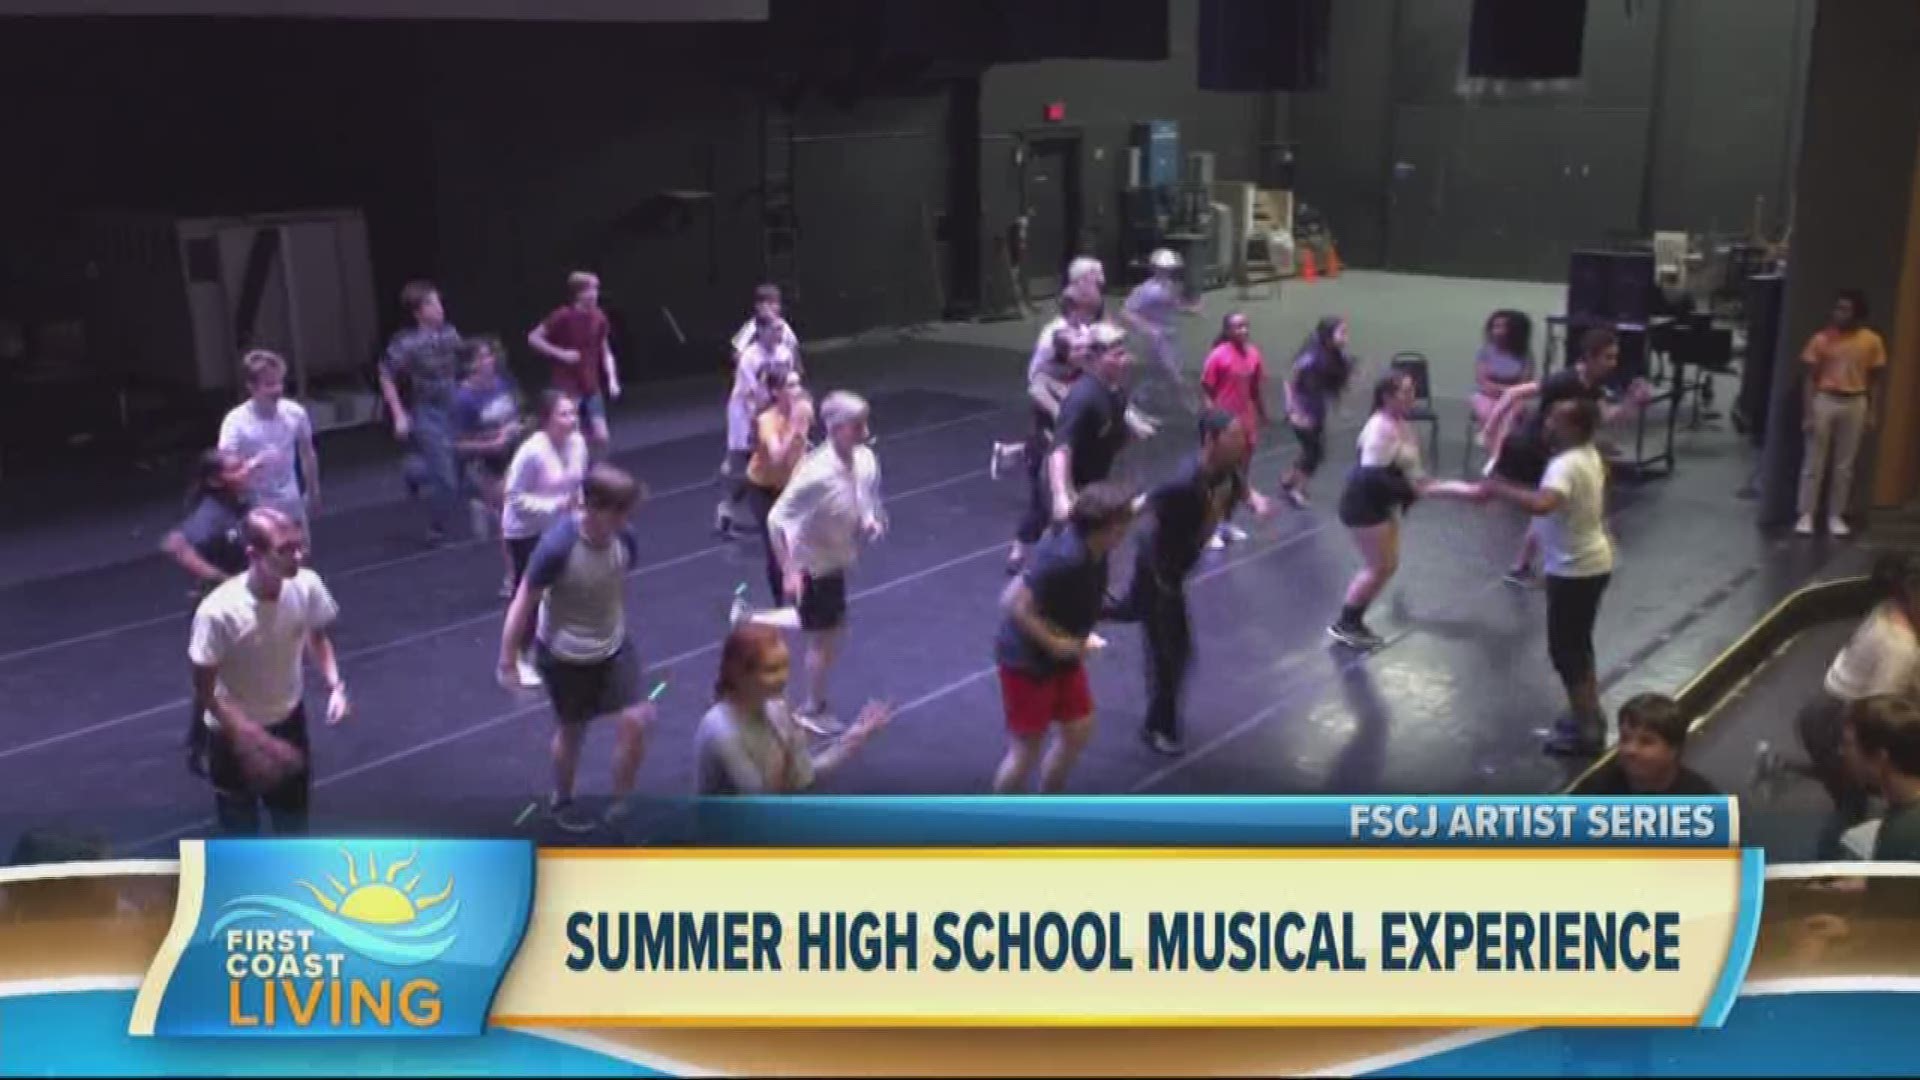 The Summer Musical Theatre Experience provides the opportunity for local area high school students  to work hands-on with some of the highest recognized local theatre professionals.